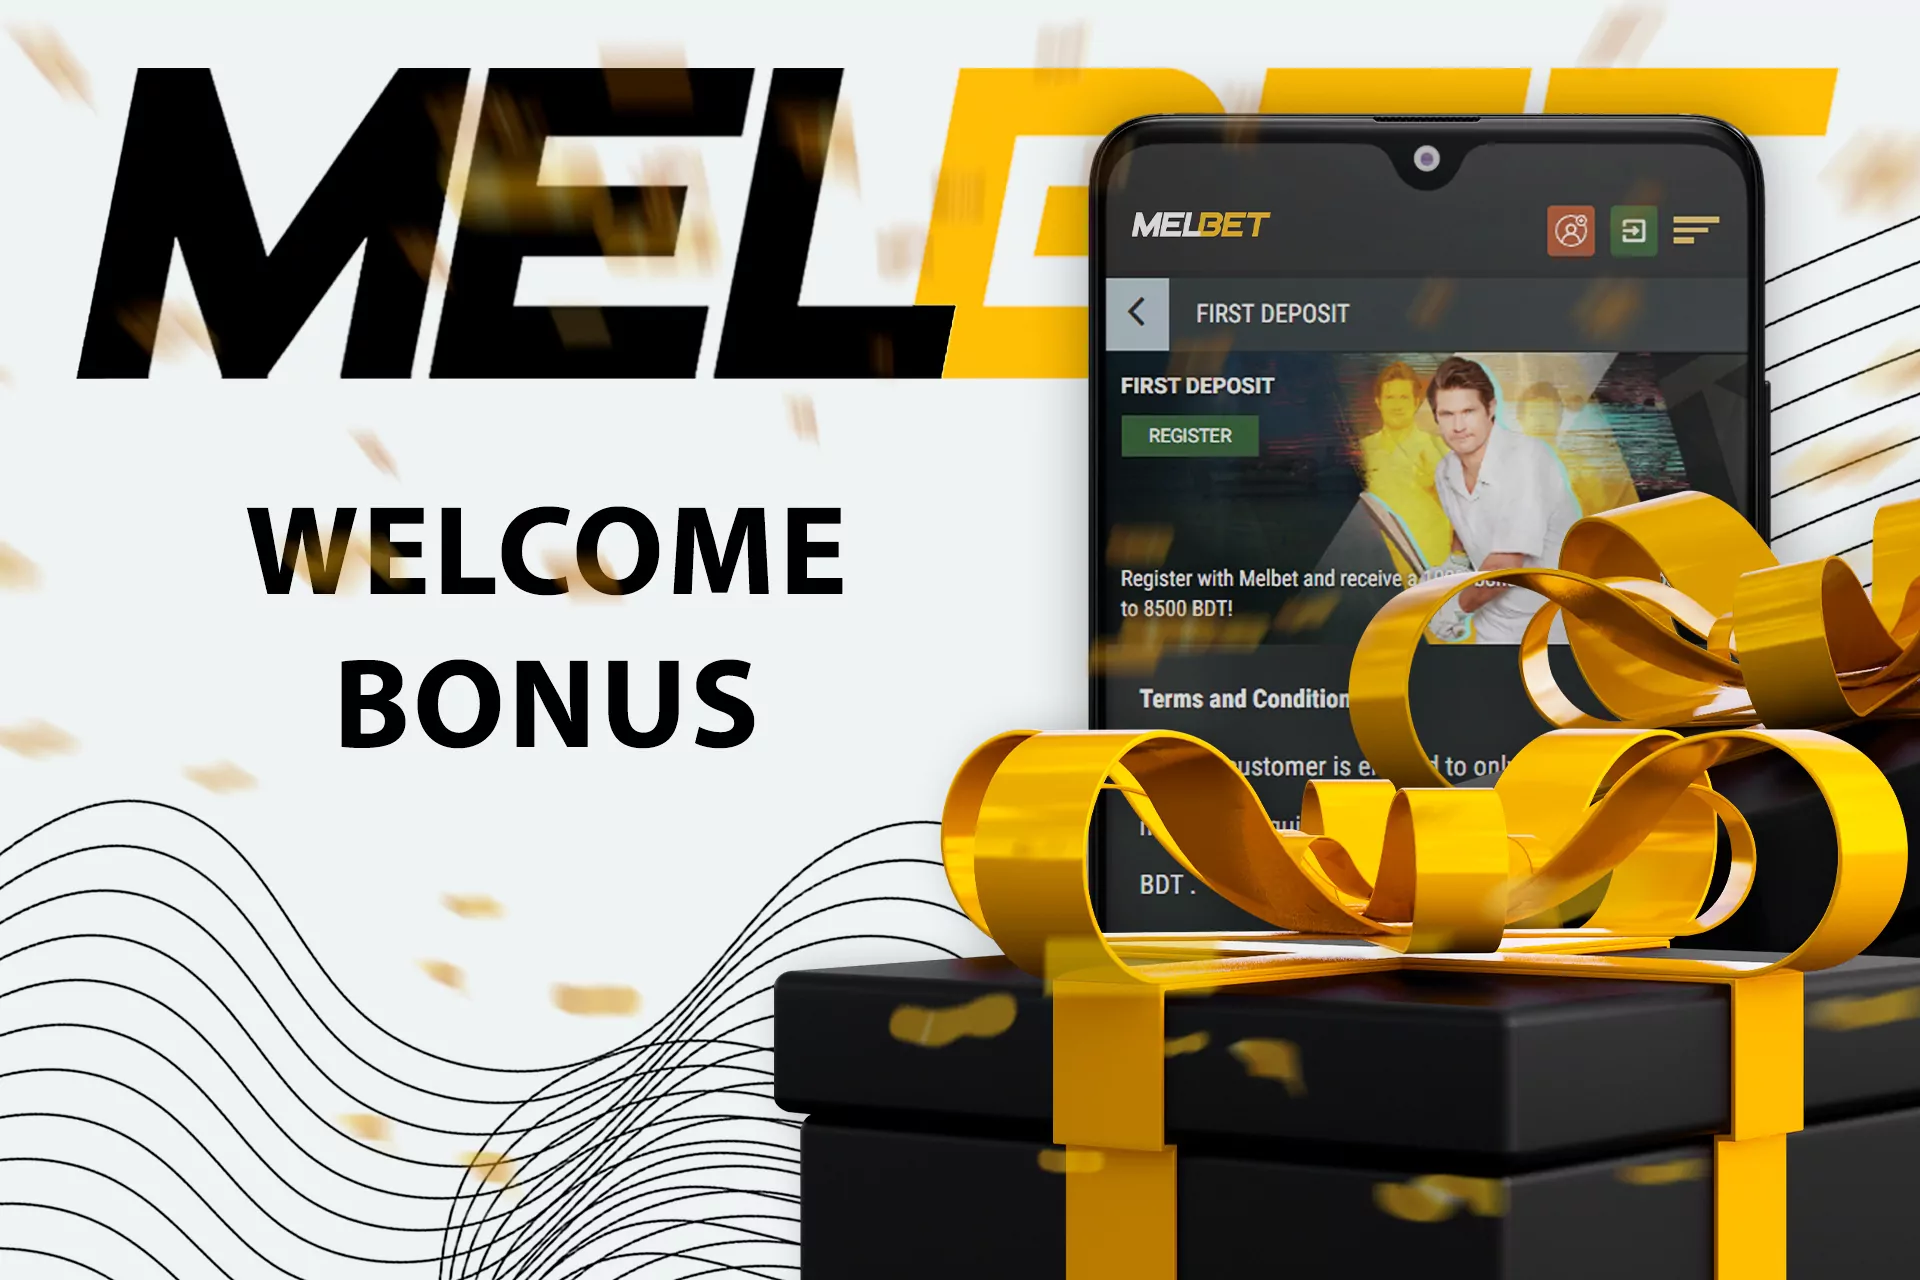 If your firstly register at Melbet, use the chance of getting a welcome bonus.